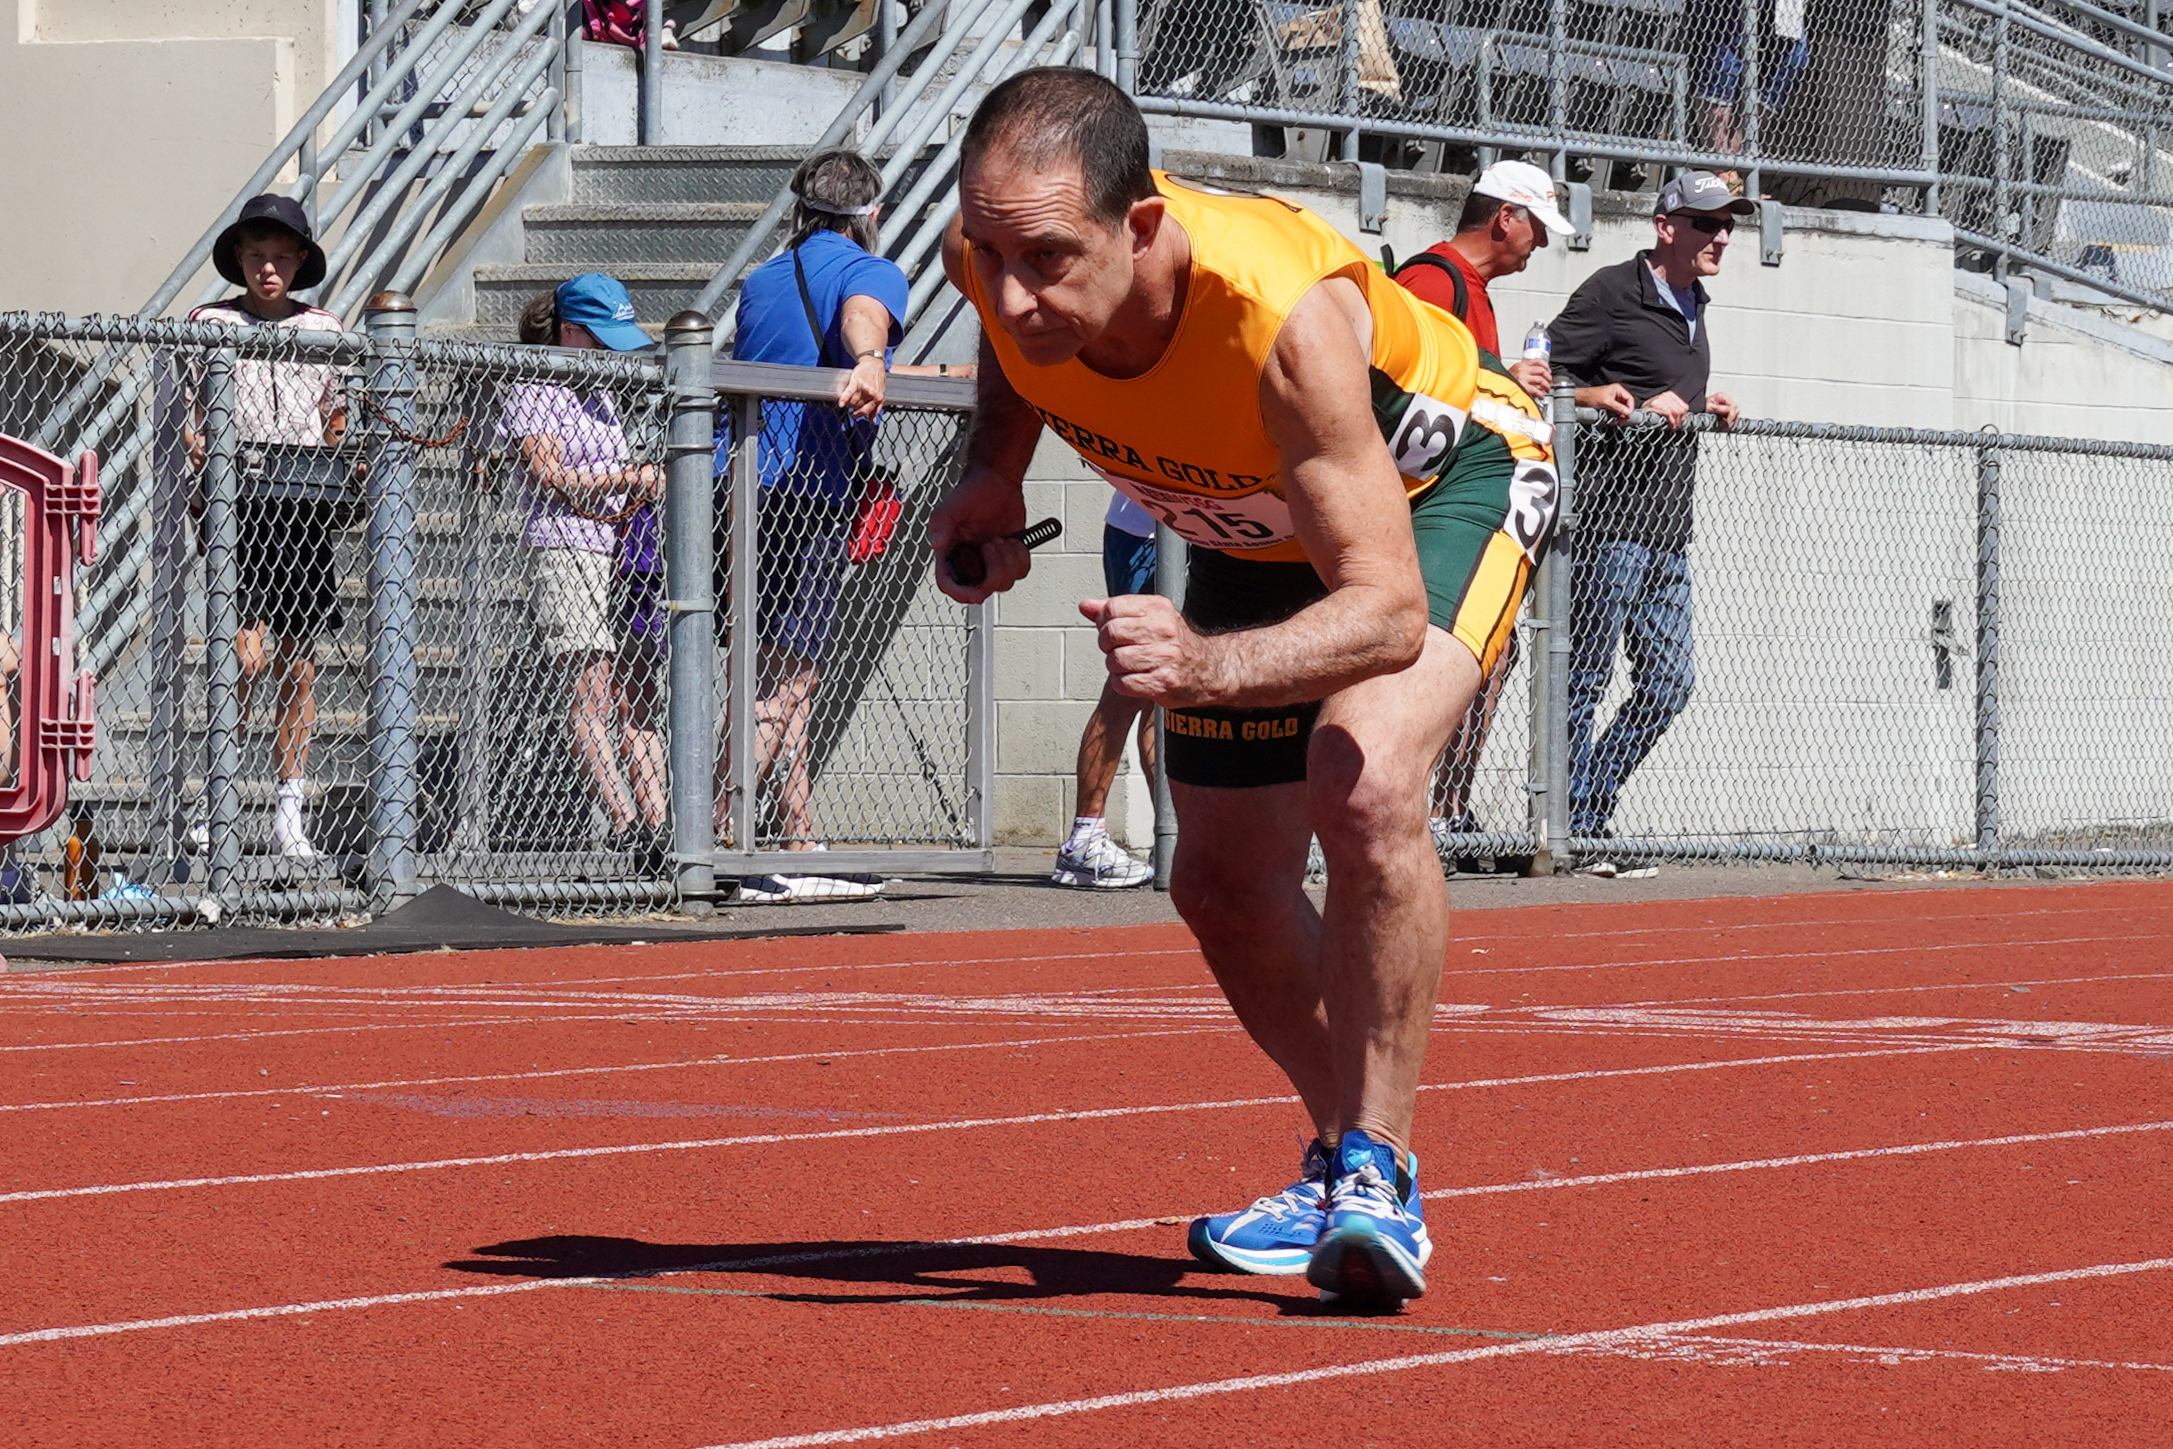 Photos from the Track & Field 800 Meter event on July 22nd